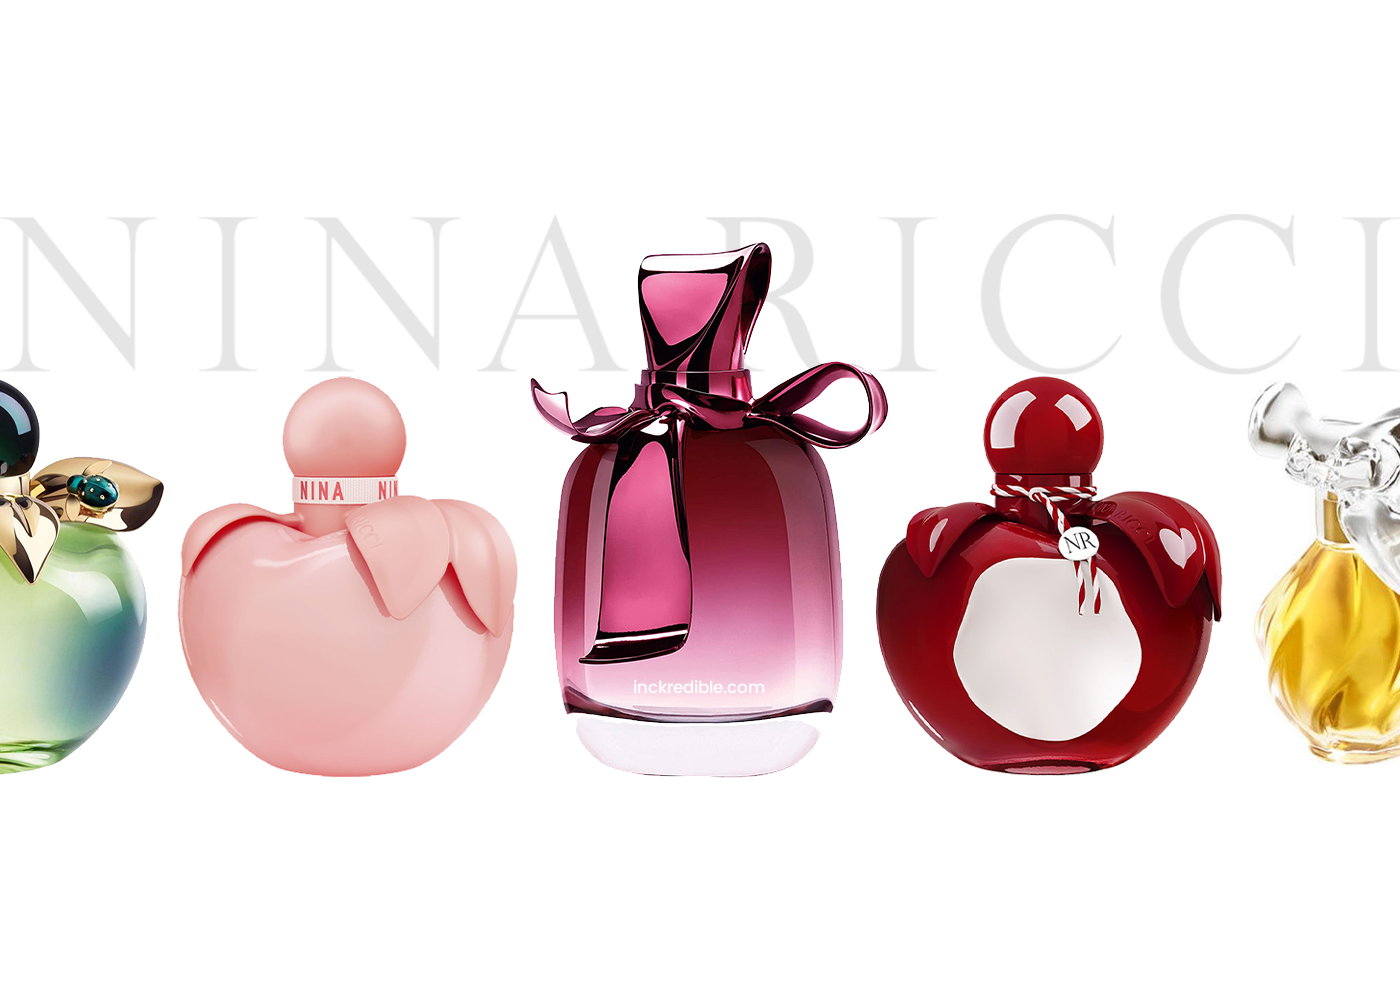 13 Best Nina Ricci Perfumes You Should Try Out - Inckredible.com